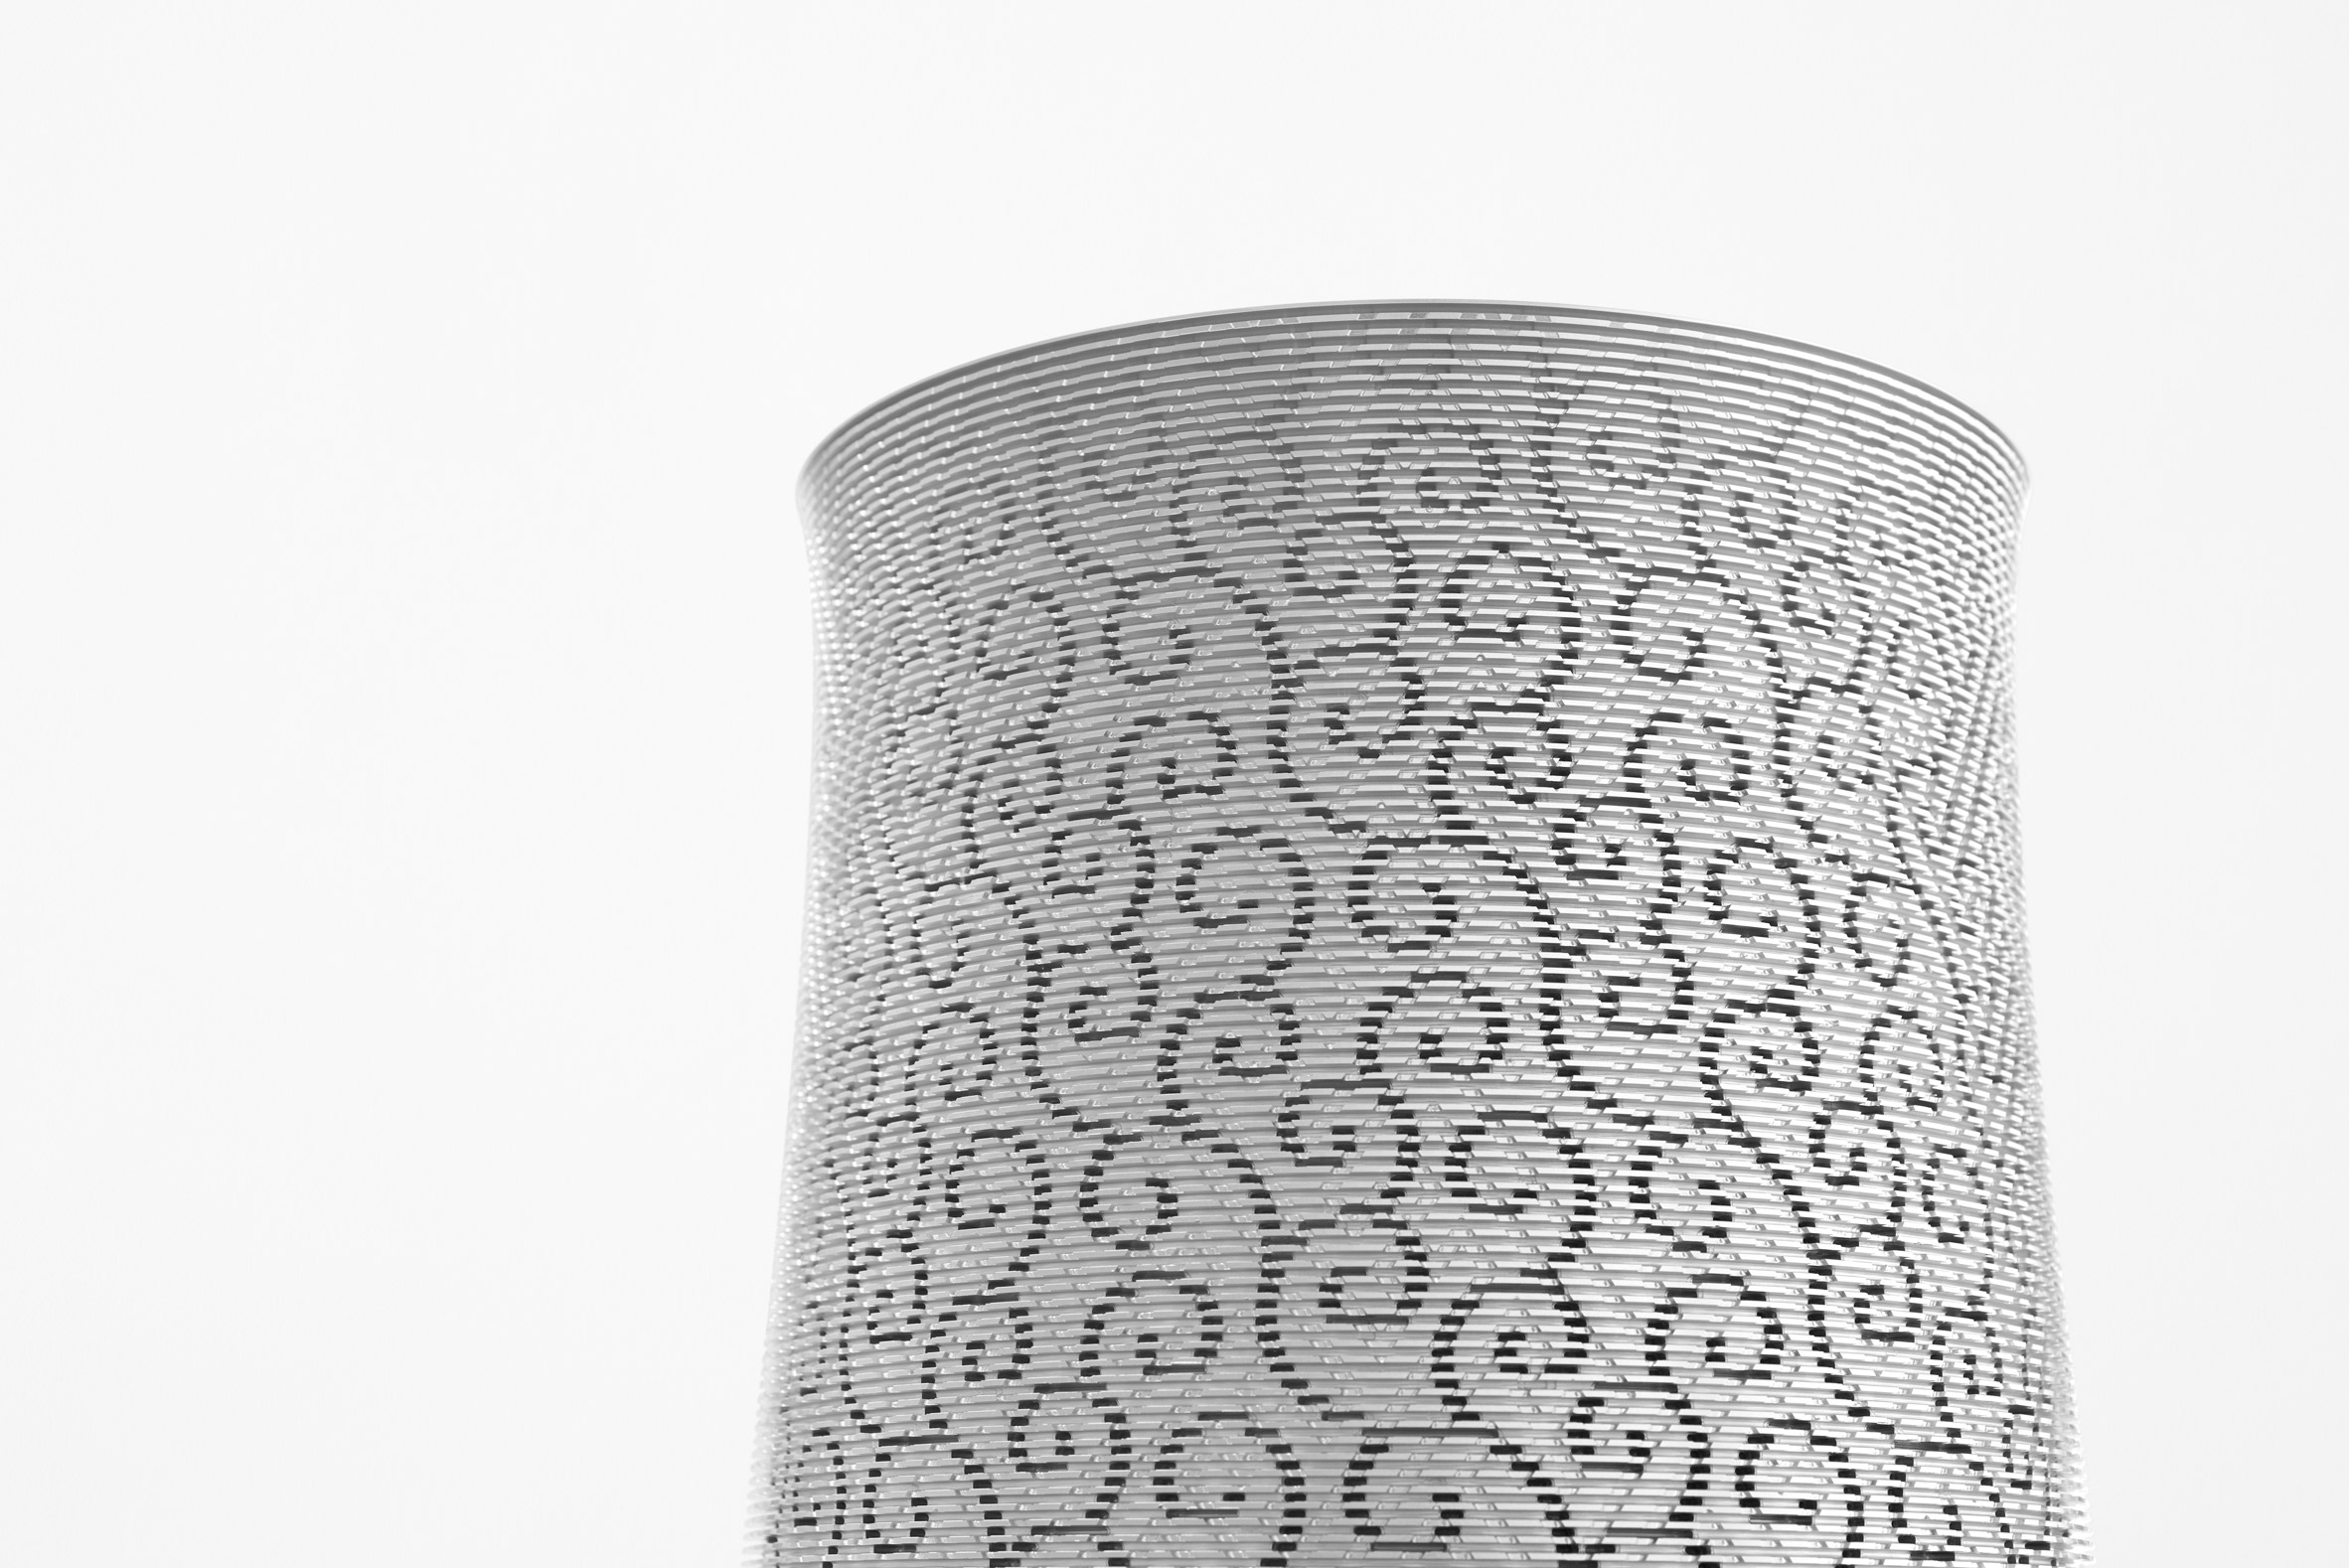 Nendo carves "four layered" vase from a single  kilo block of